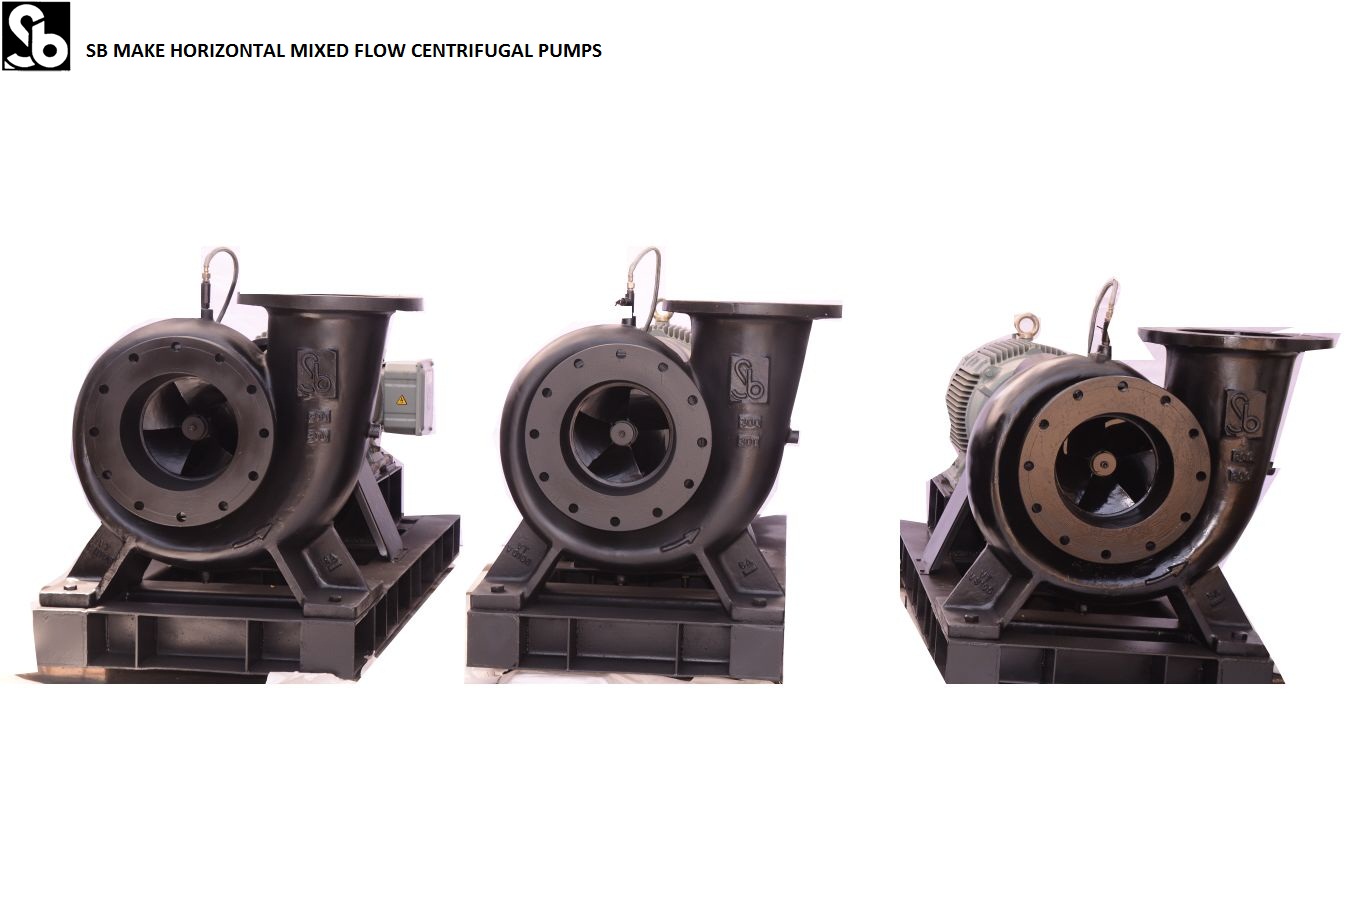 Mixed Flow Centrifugal Pumps Manufacturers In India | S B Pumps India |  Mixed Flow Centrifugal Pumps Manufacturers In India, Mixed Flow Centrifugal Pumps Manufacturers In Madhya Pradesh, Mixed Flow Centrifugal Pumps Manufacturers In Indore, Mixed Flow Centrifugal Pumps  - GL50708